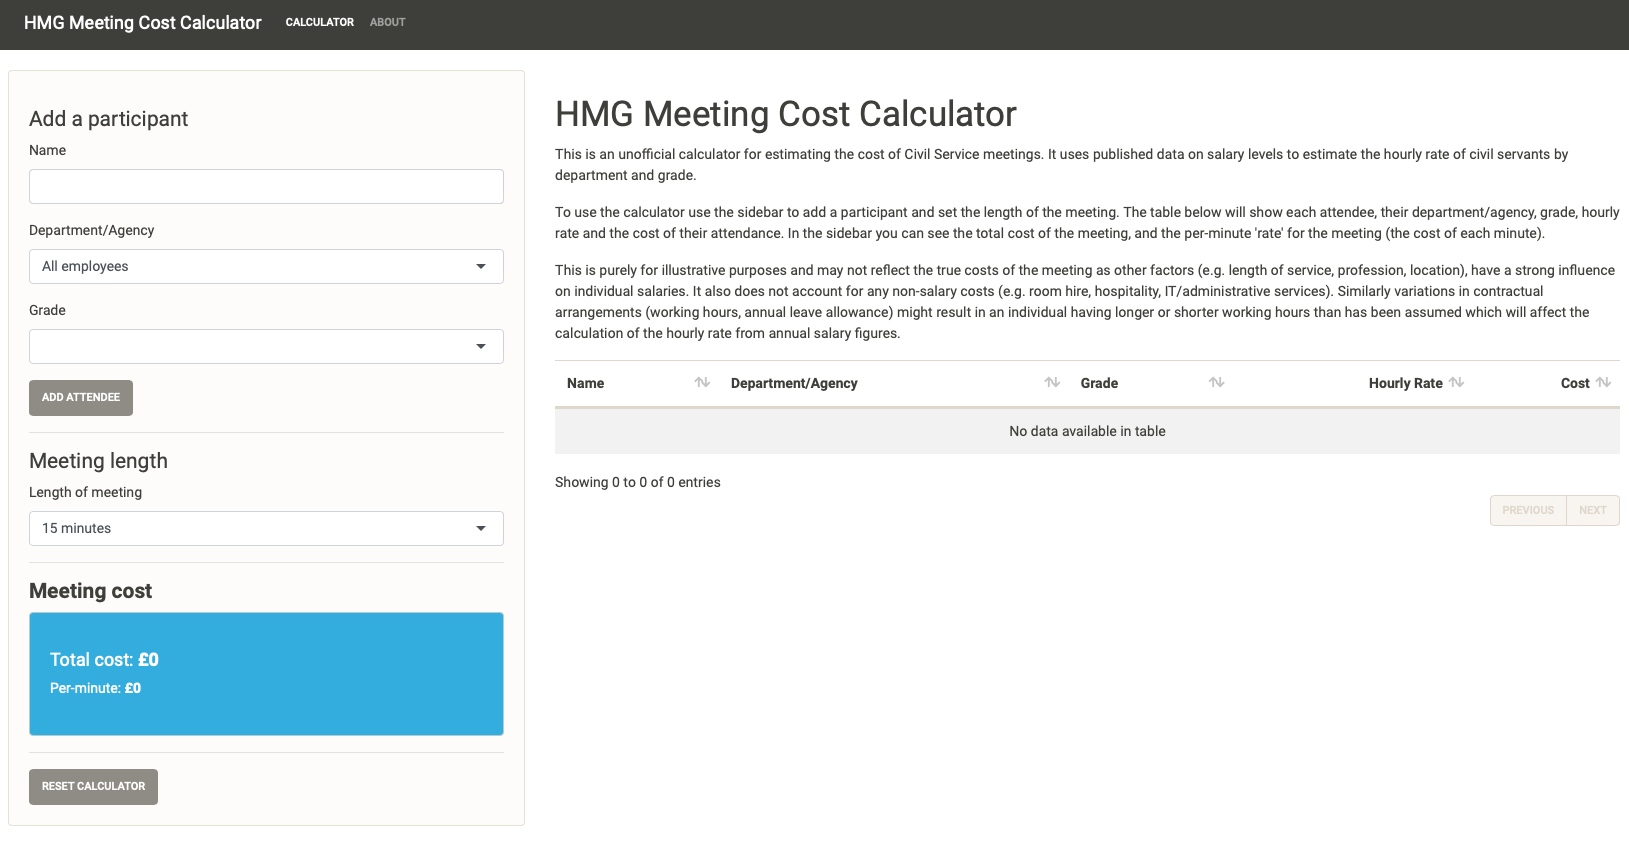 The user interface of the HMG Meeting Cost Calculator